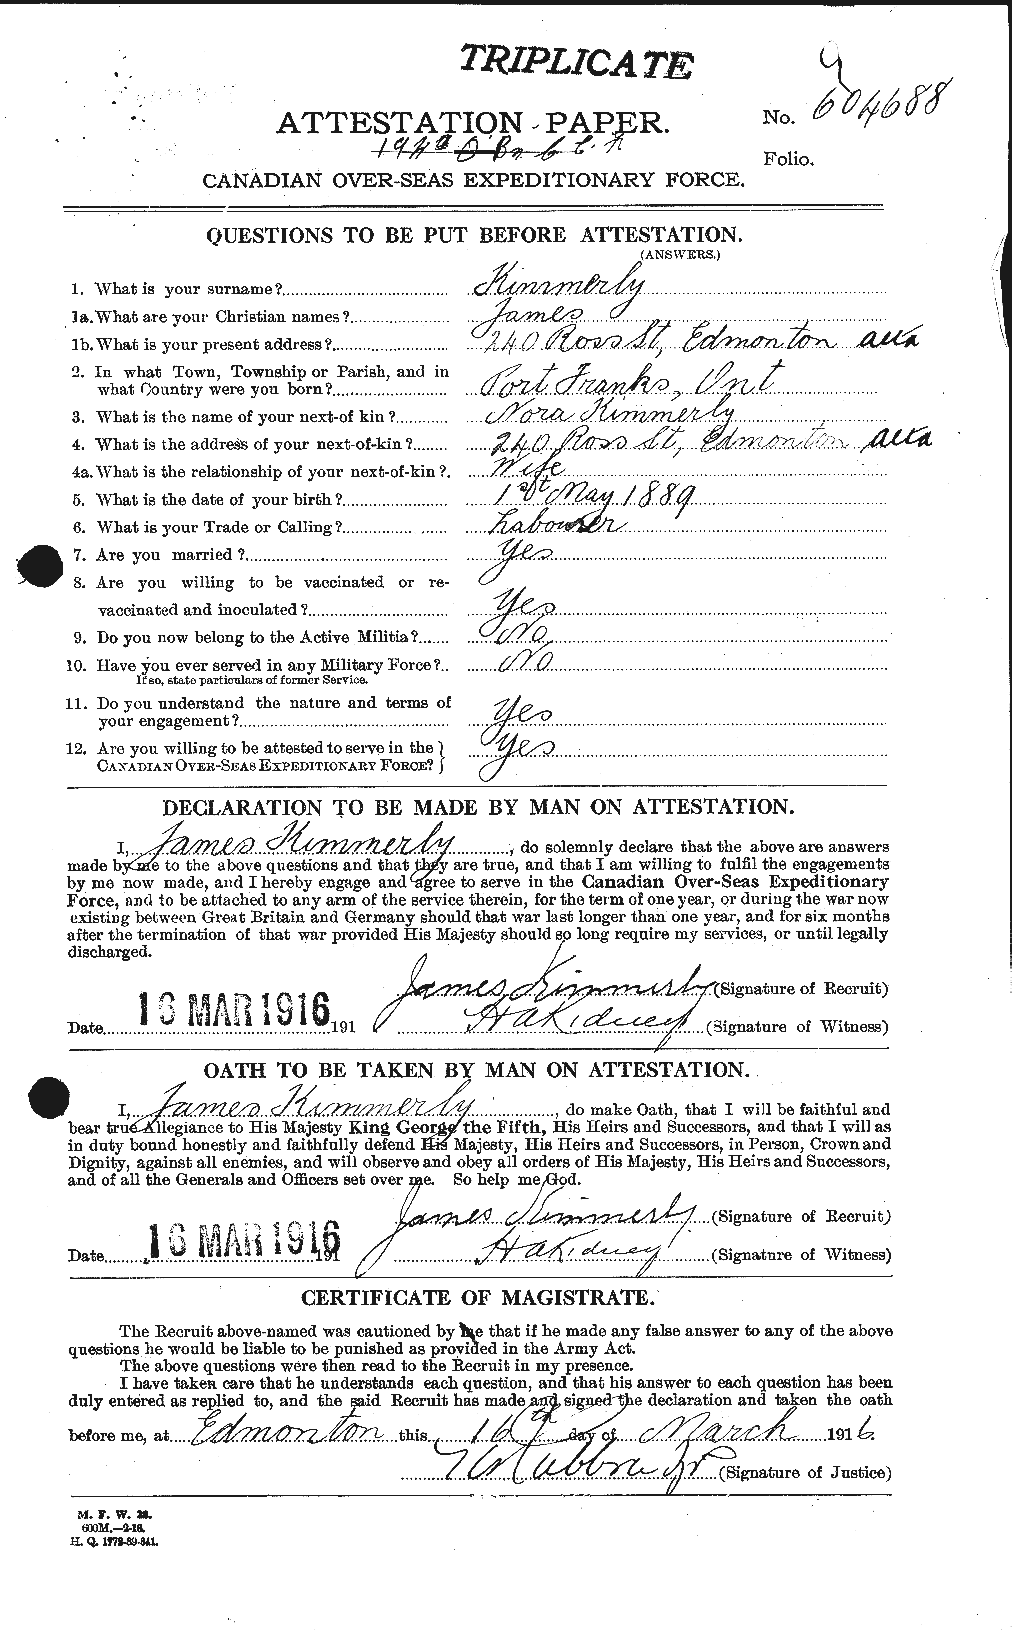 Personnel Records of the First World War - CEF 435364a